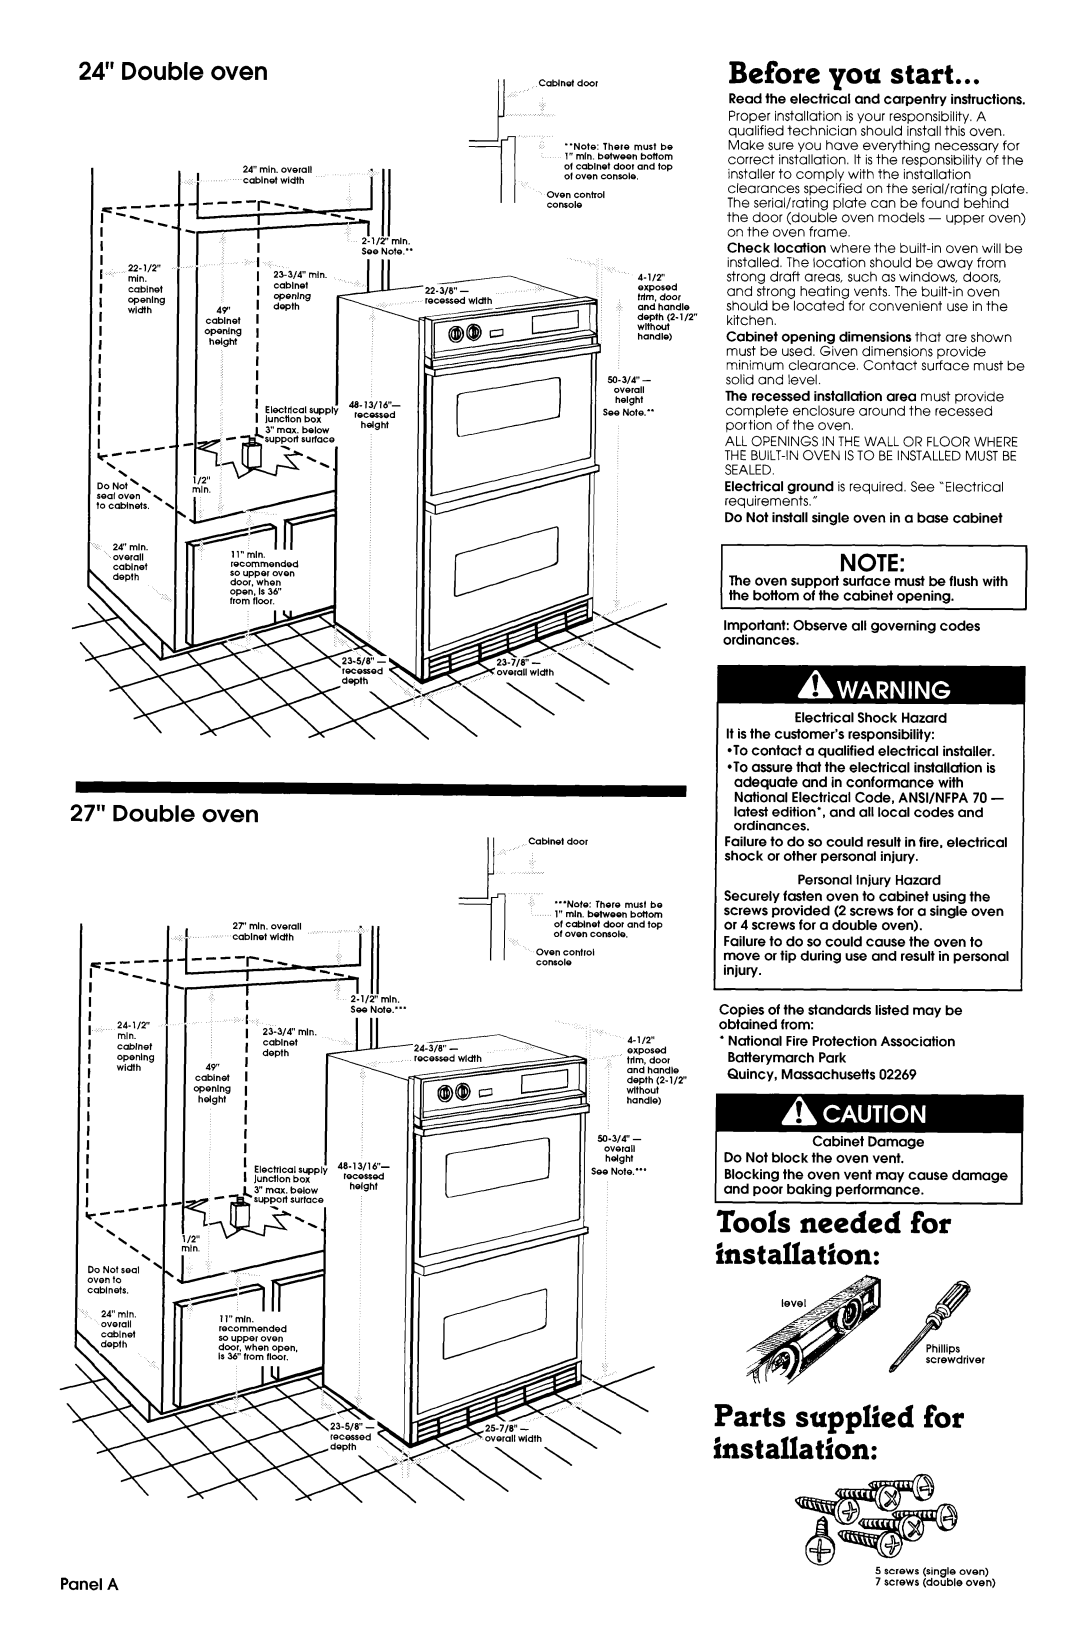 Maytag 3183636 Before you start, Tools needed for installation, Parts supplied for installation, 24” Double oven, Panel A 